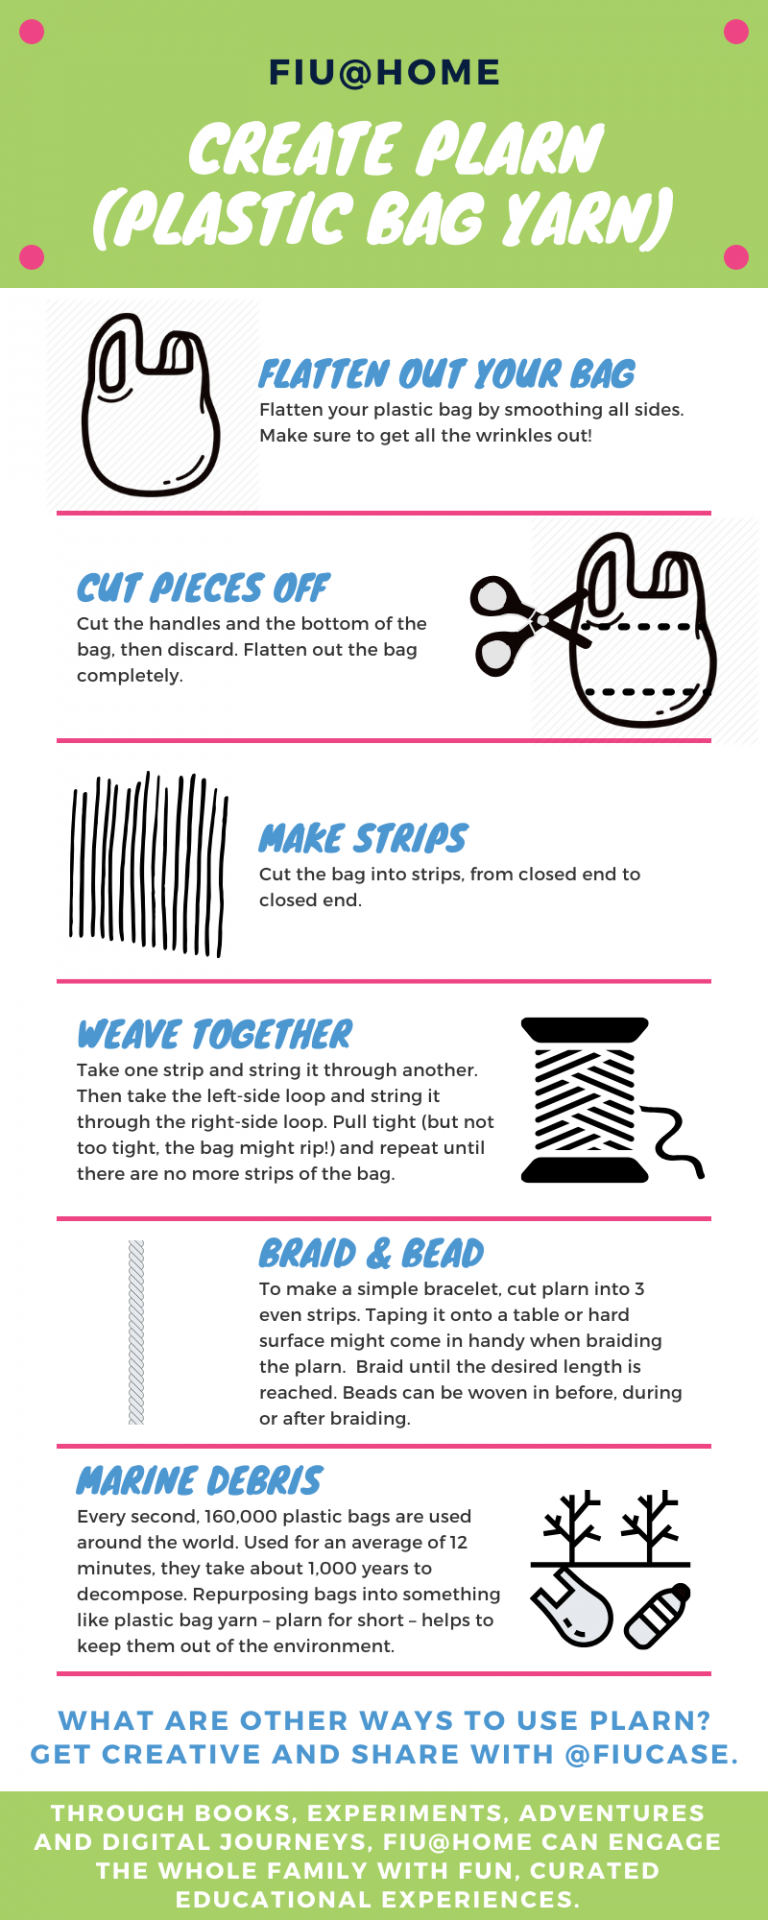 plarn-infographic-768x1920.png